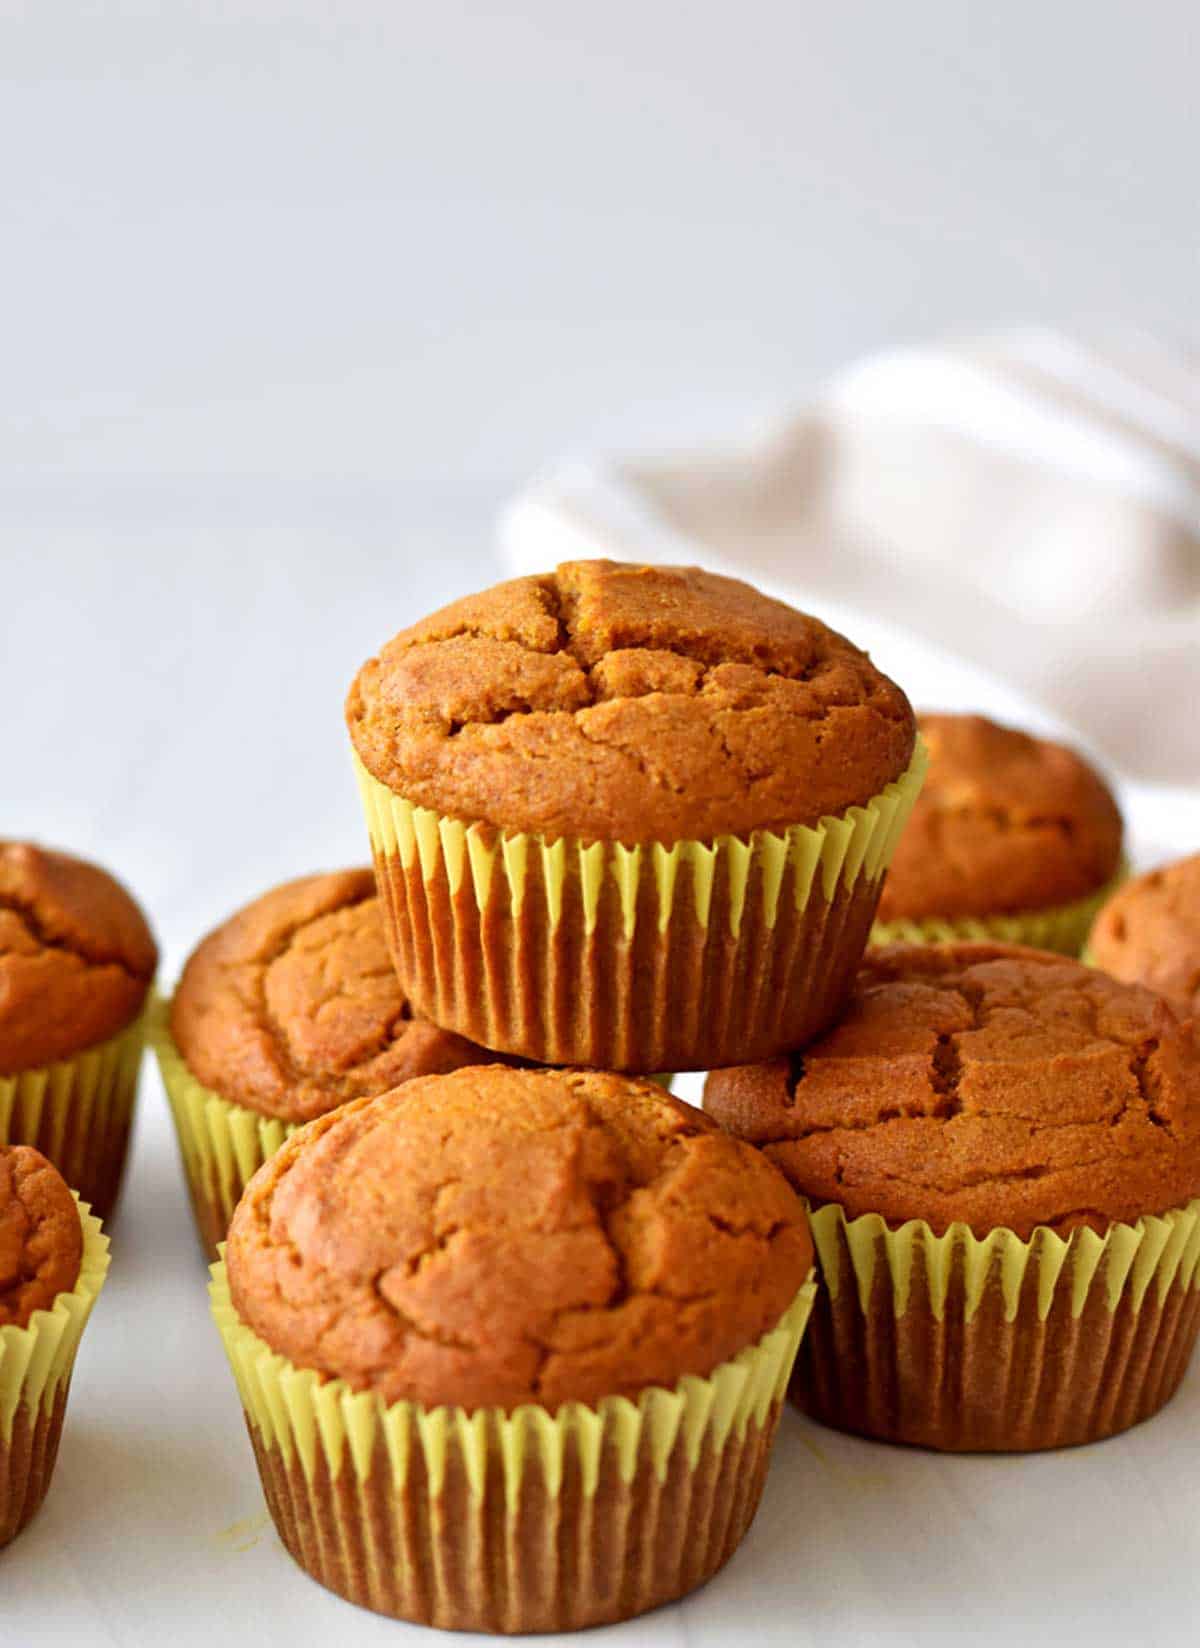 A stack of gluten free pumpkin muffins and a brown and white striped kitchen towel in the background.